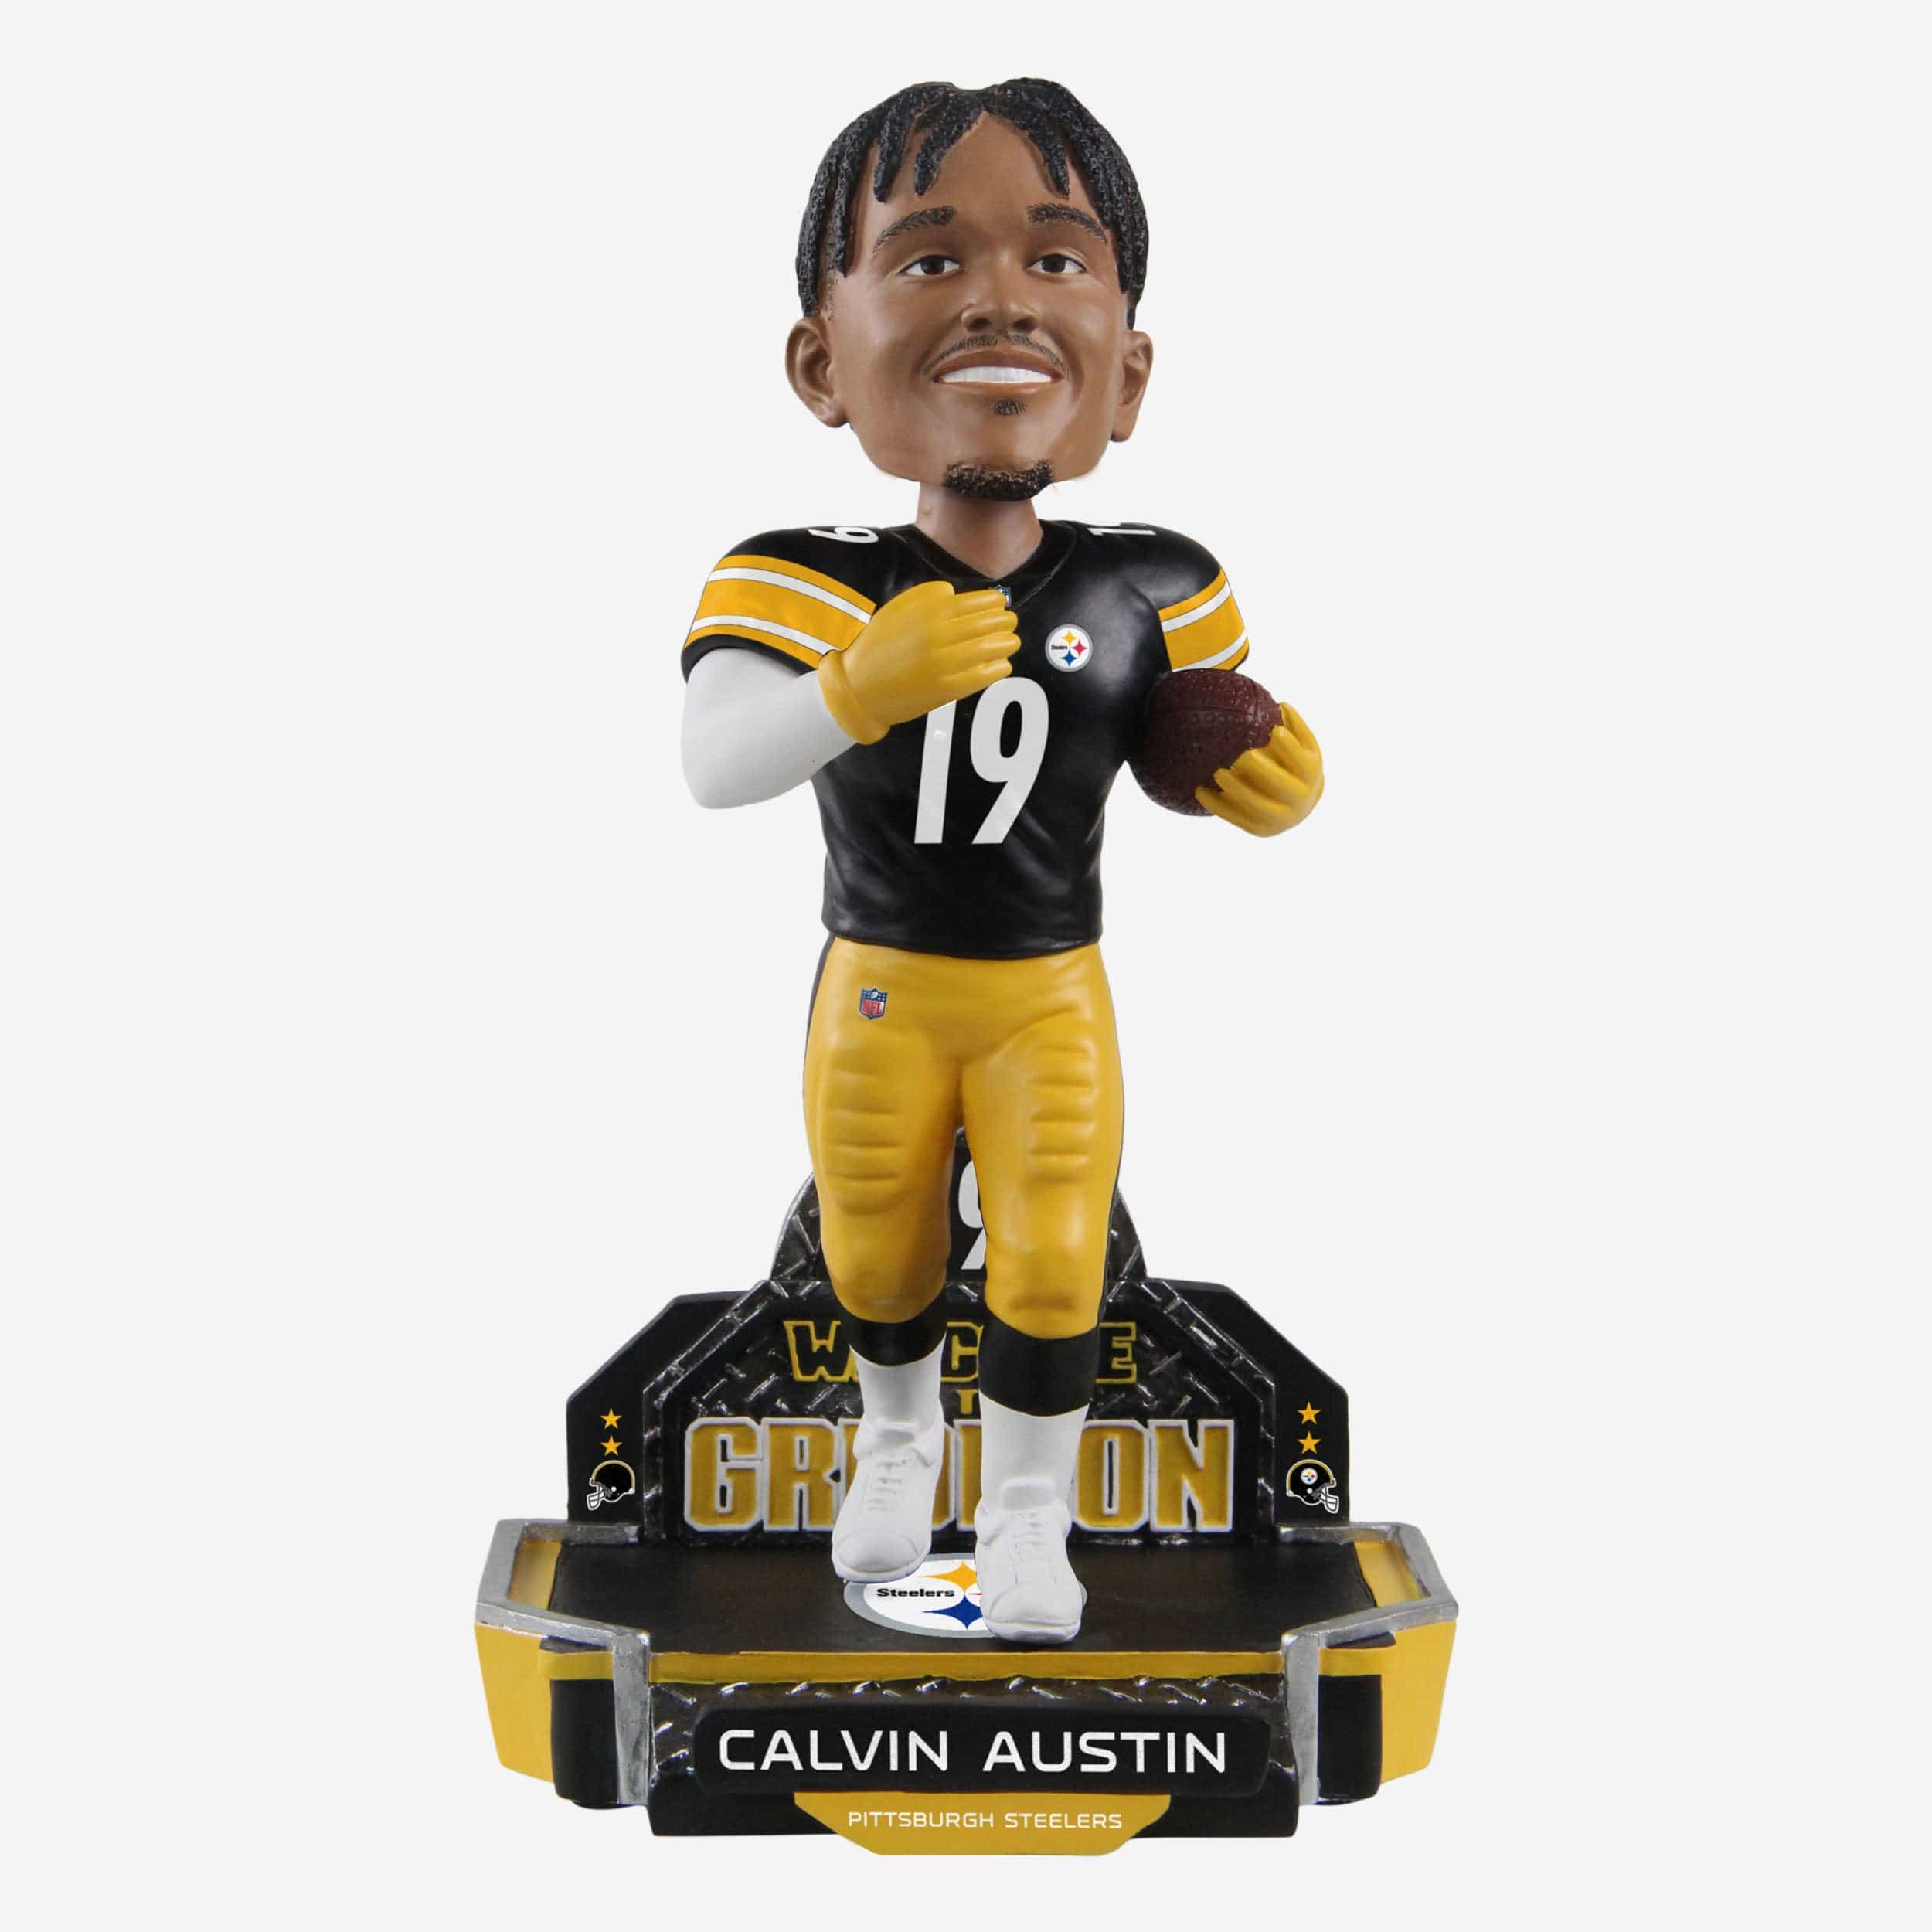 Calvin Austin Pittsburgh Steelers NFL 2022 Rookie Series Bobblehead Officially Licensed by NFL